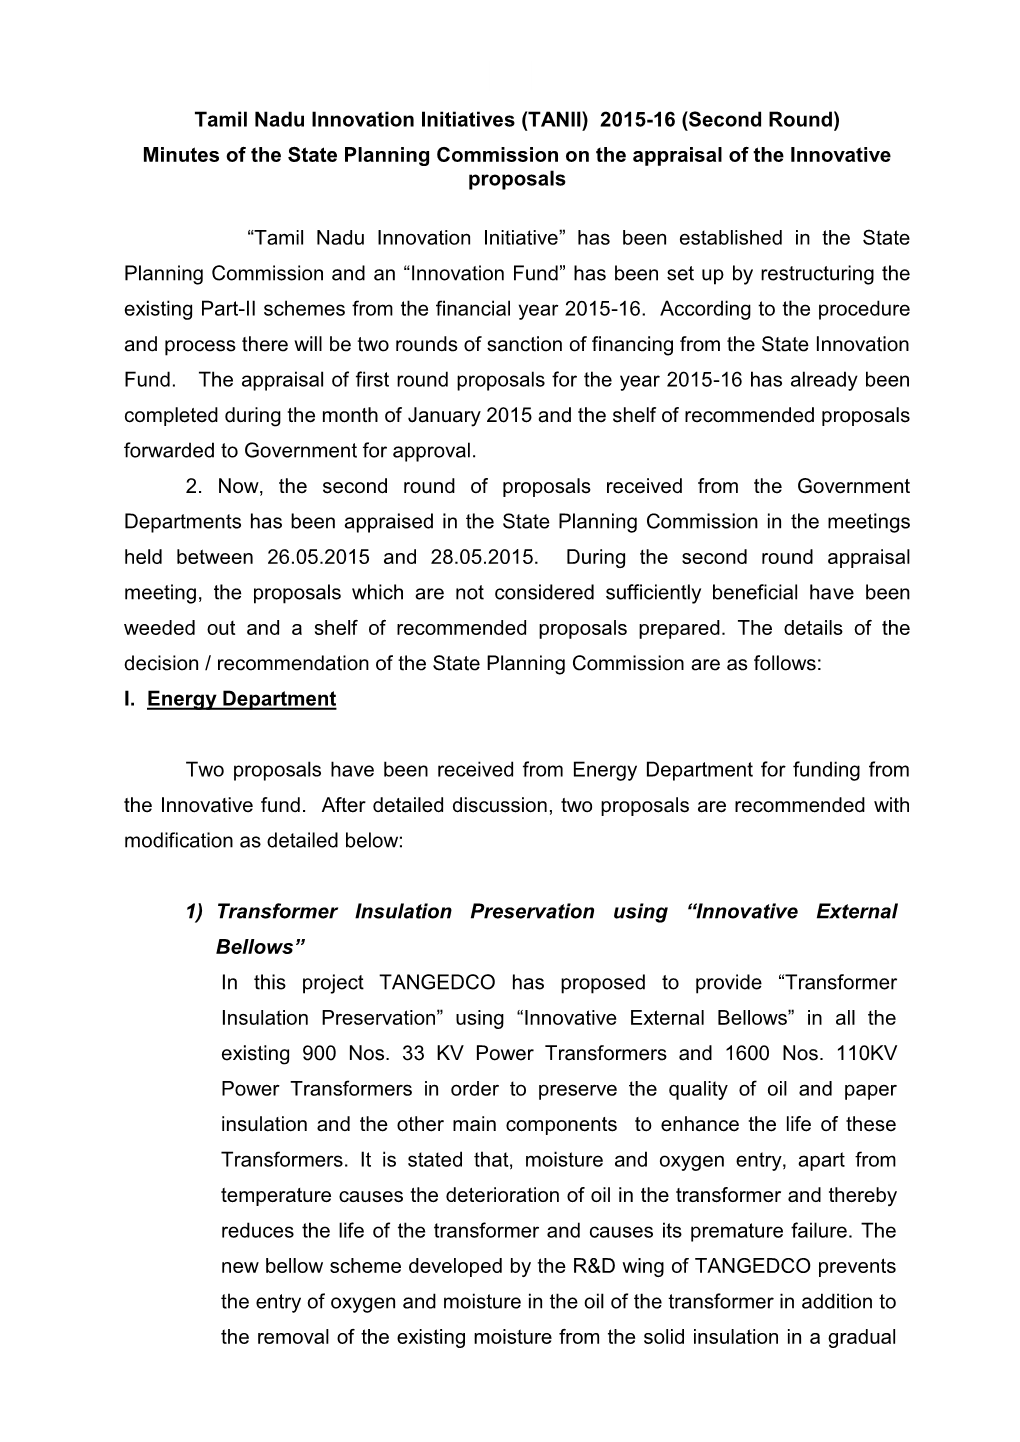 TANII) 2015-16 (Second Round) Minutes of the State Planning Commission on the Appraisal of the Innovative Proposals